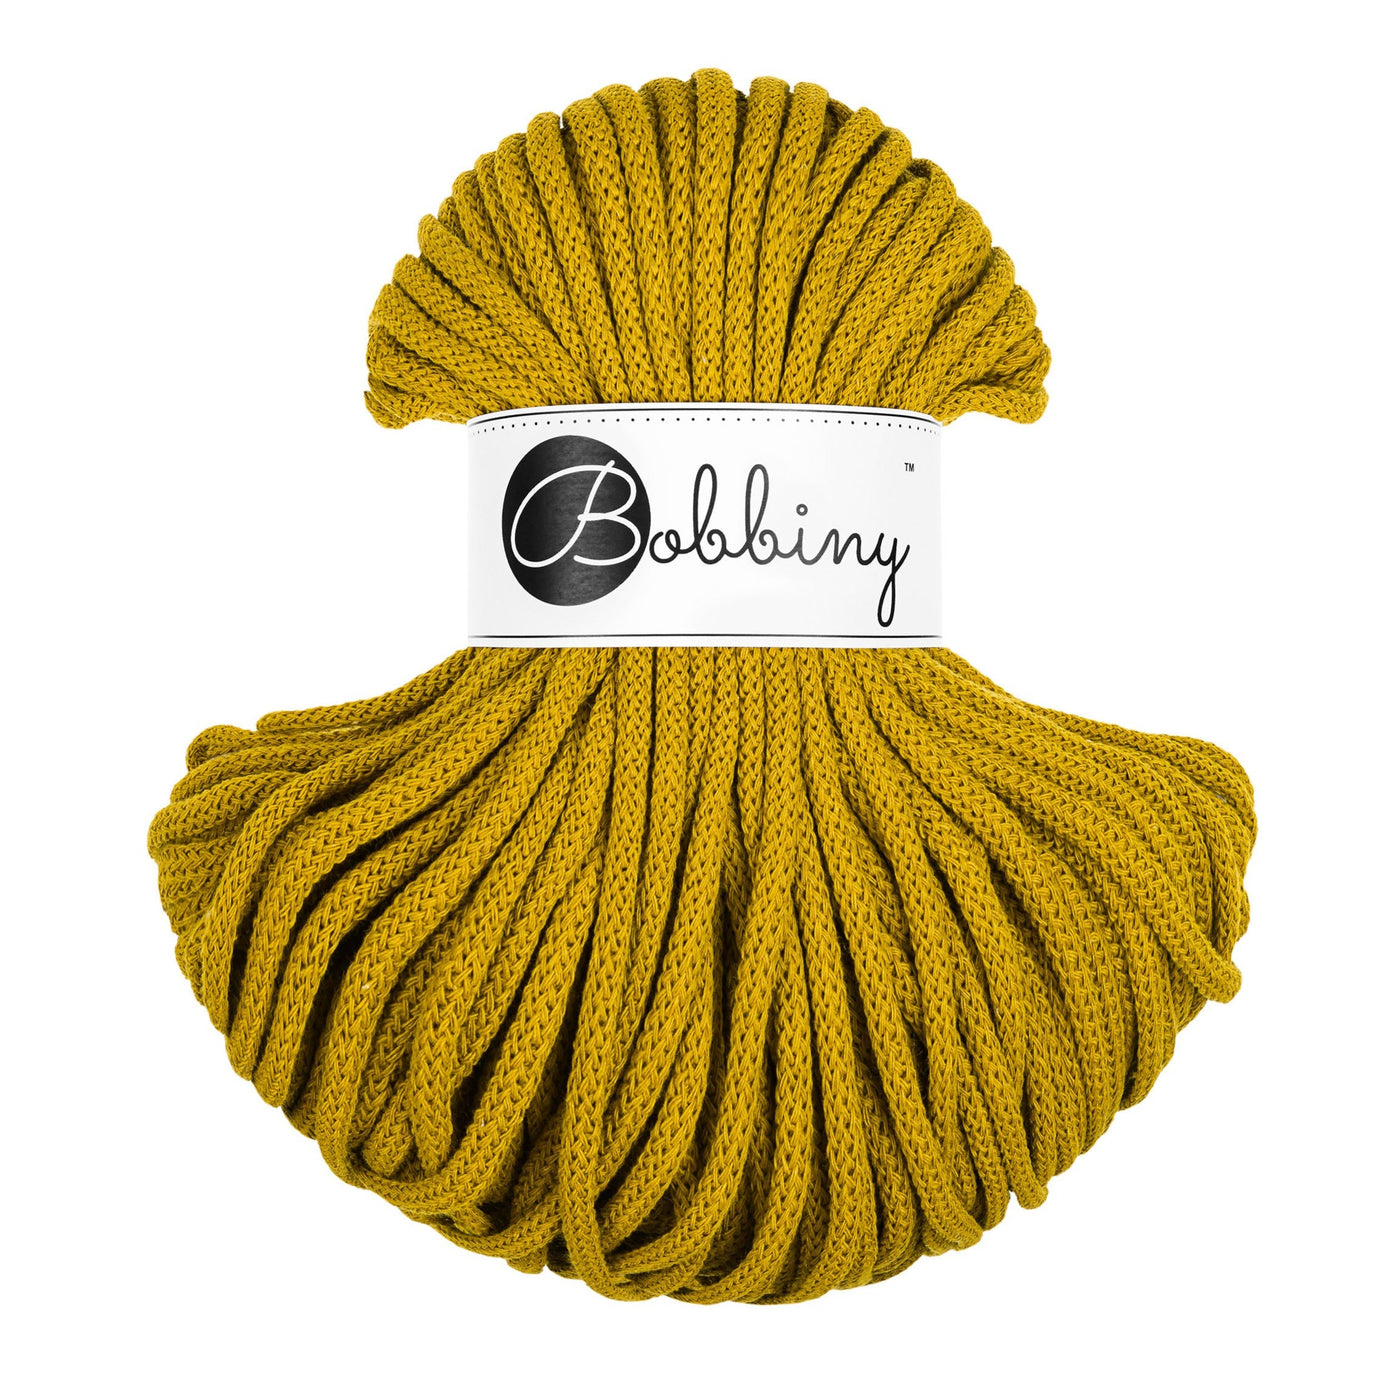 Bobbiny braided cord 5mm 50m in spicy yellow